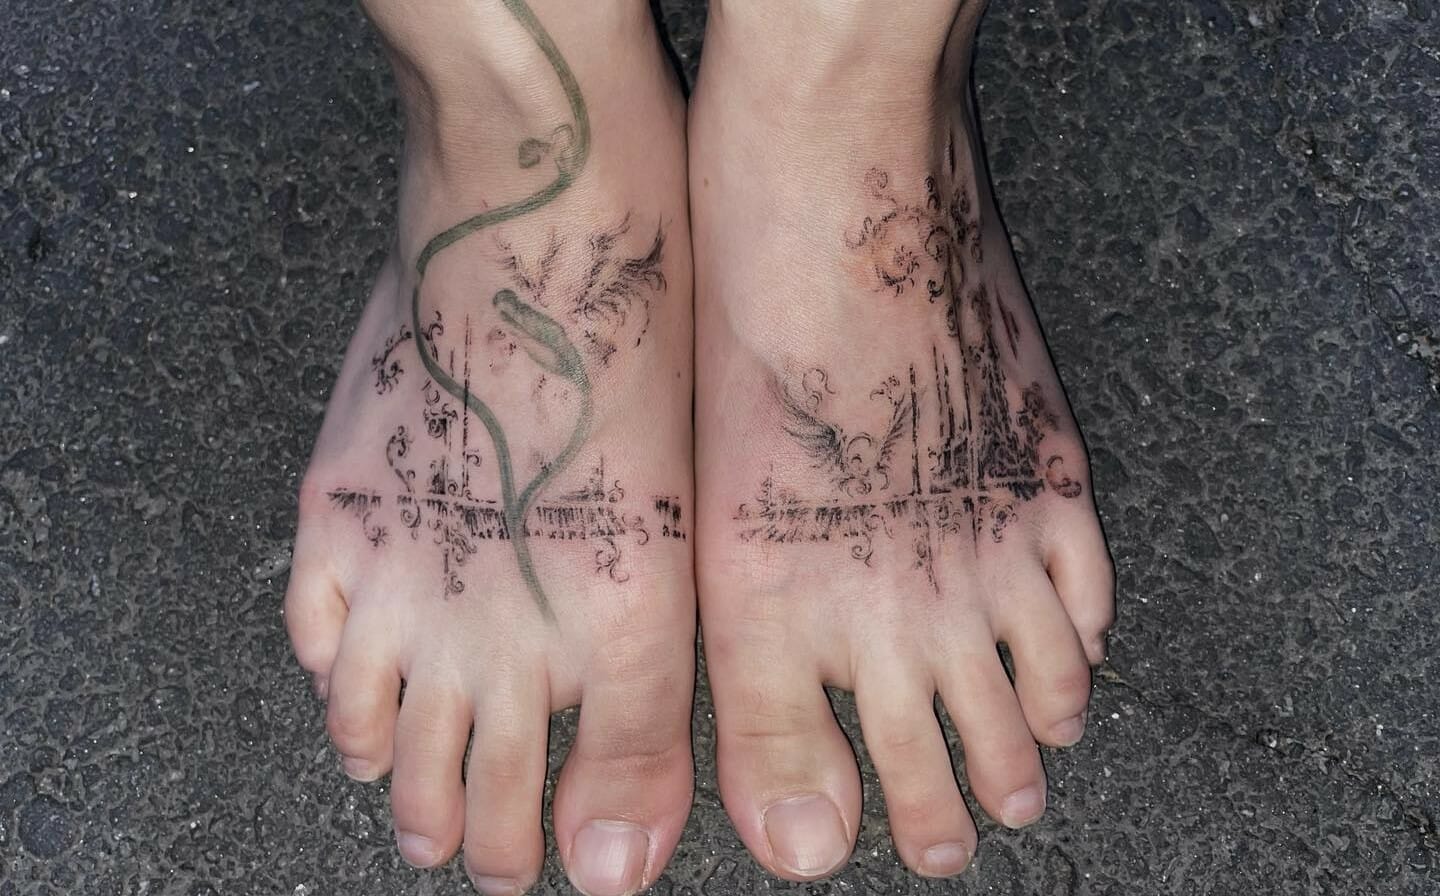 27 Small And Cute Foot Tattoo Ideas For Women - Styleoholic